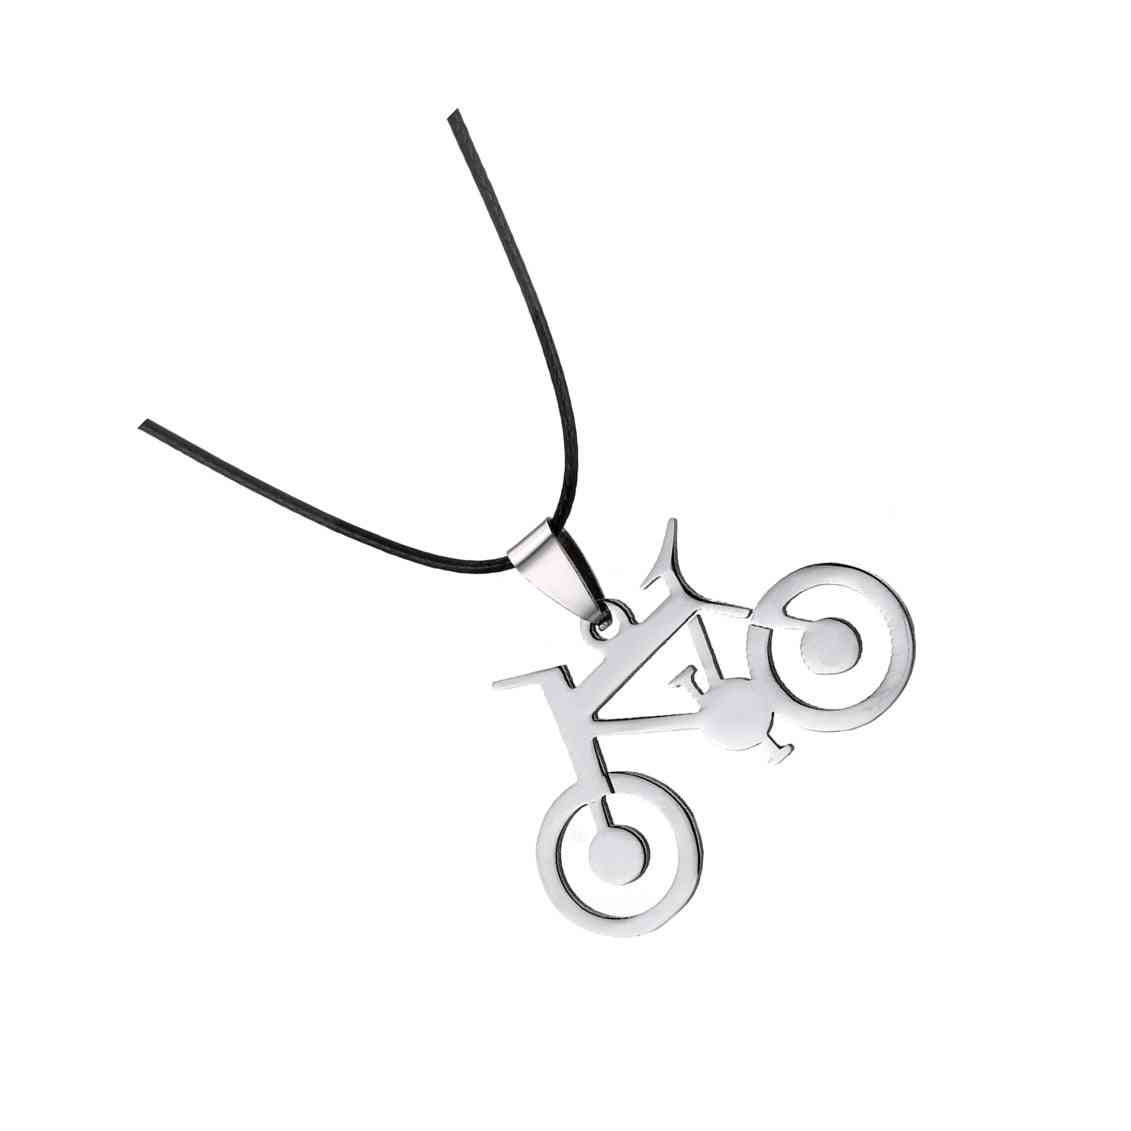 ]fashion Men Jewelry Bicycle Pendants Necklaces Stainless Steel